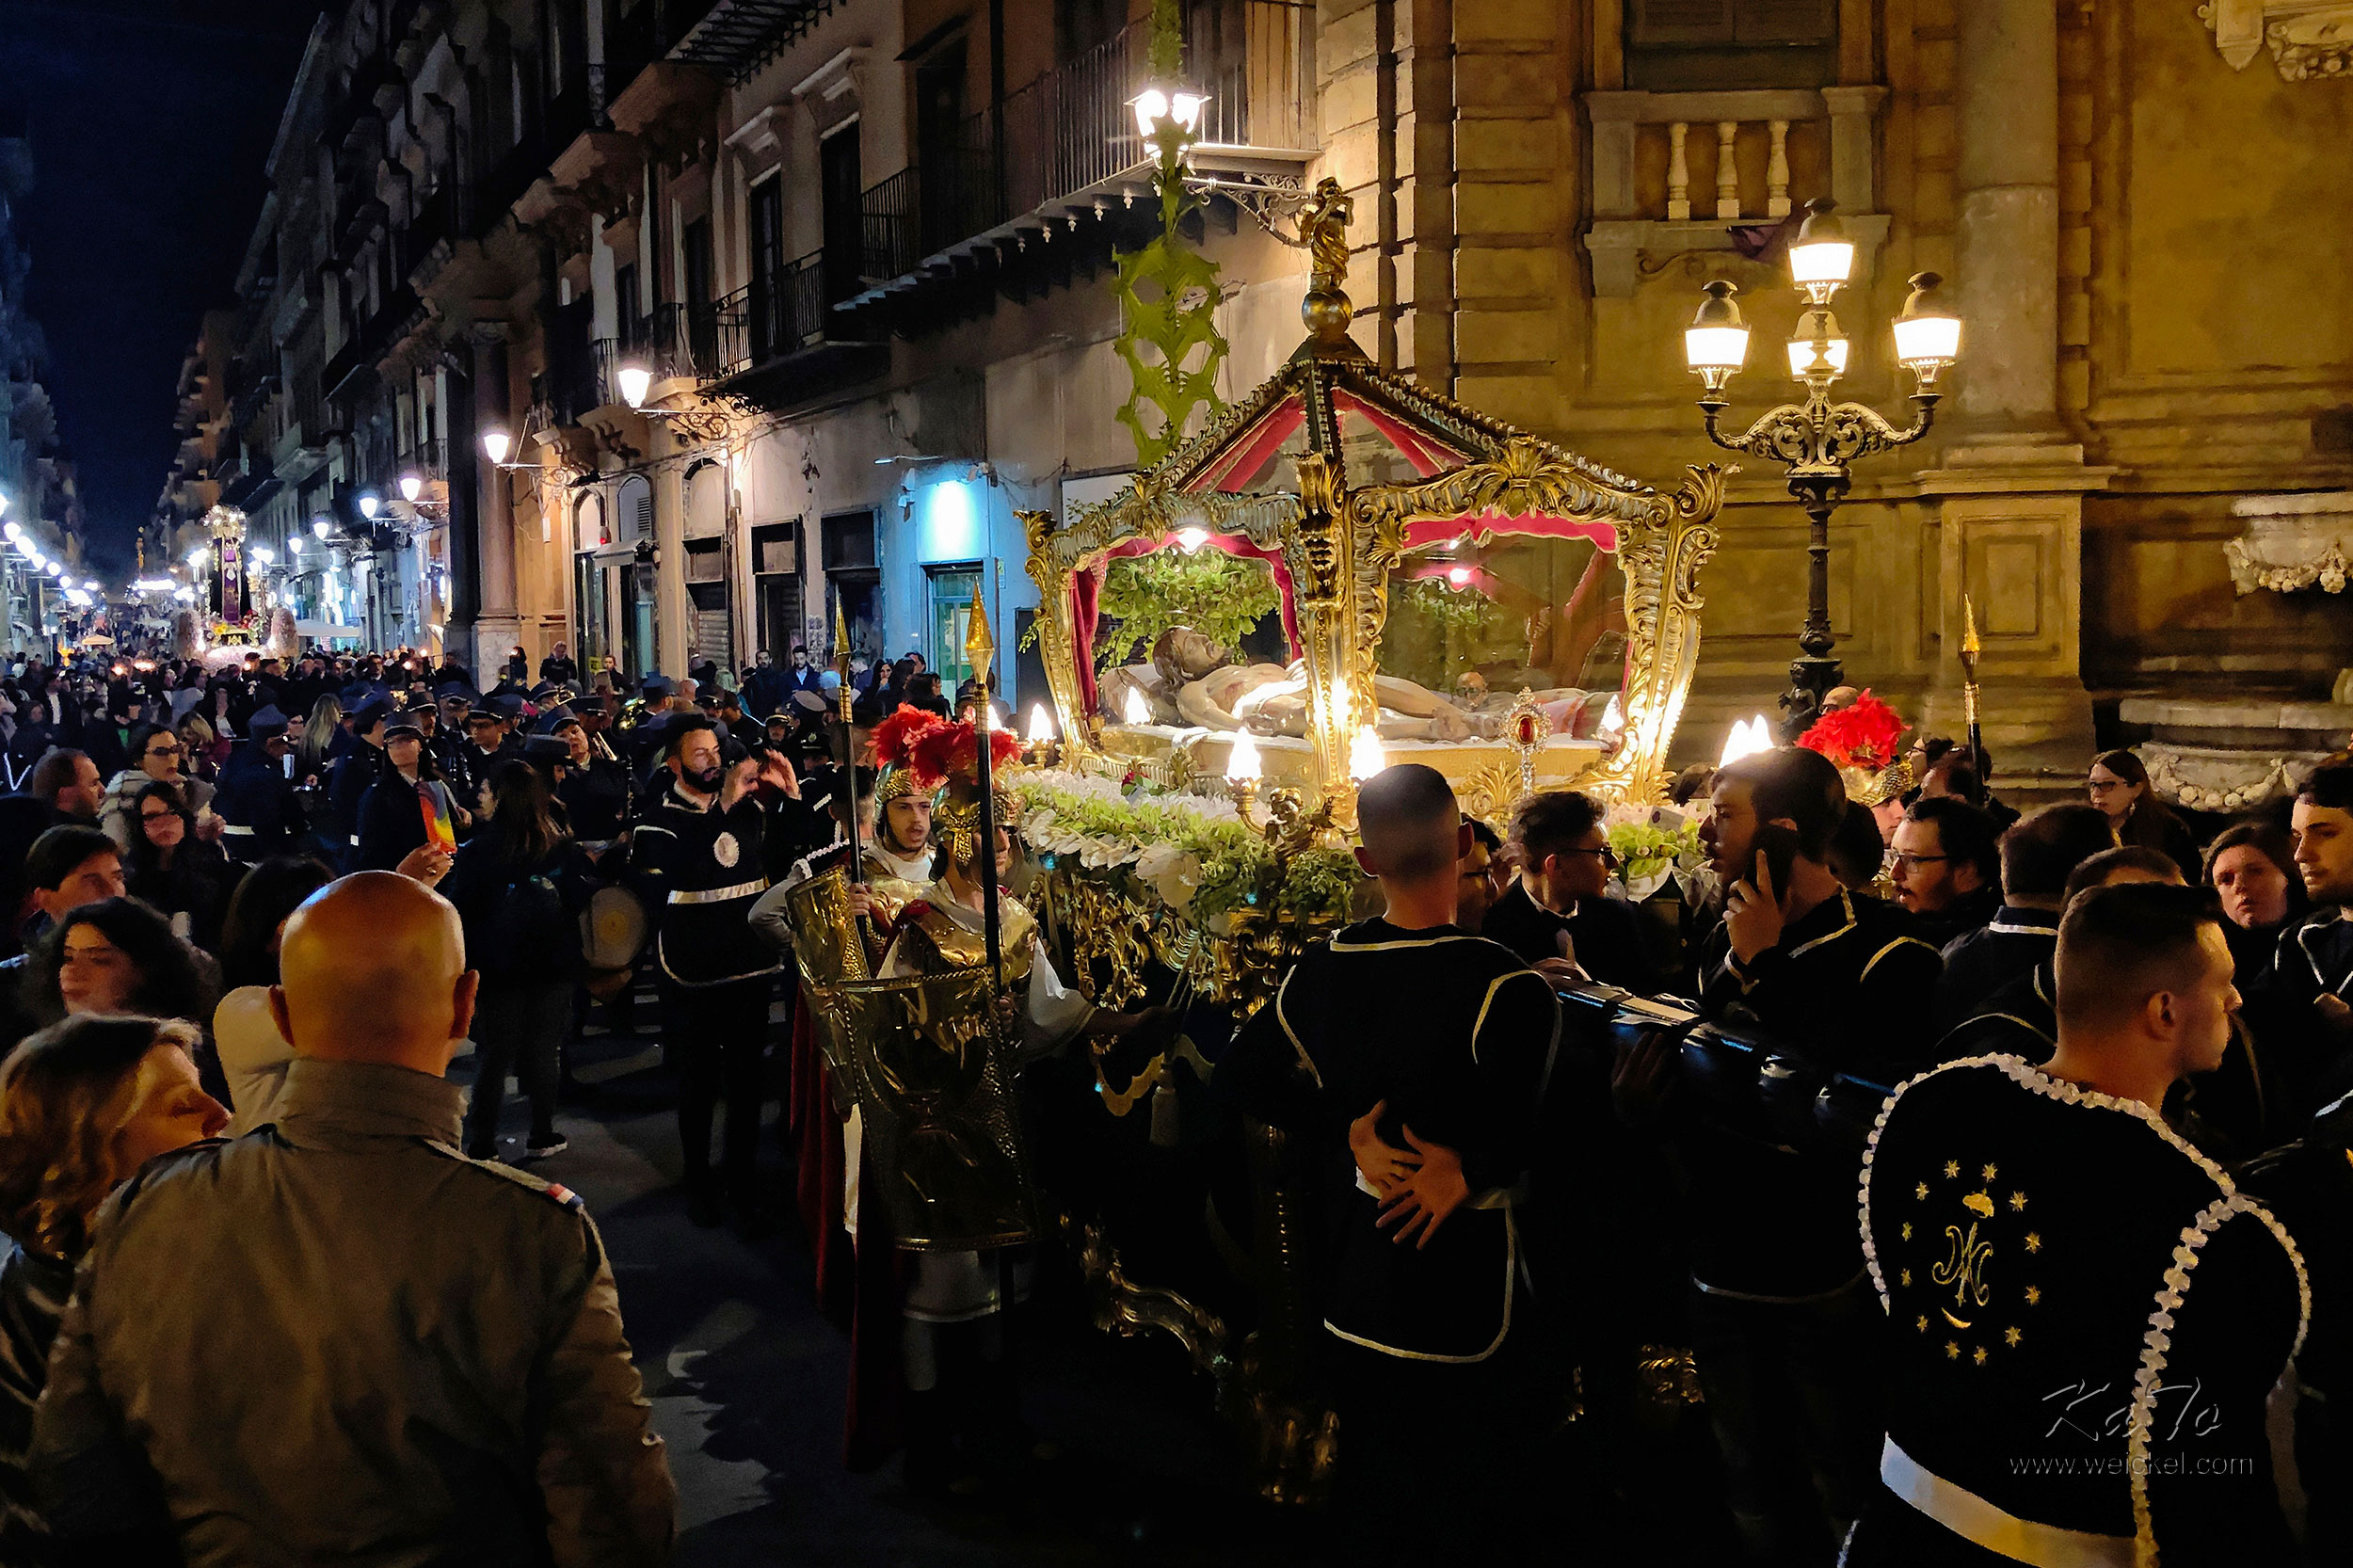 Procession in Palermo - almost all streets closed....